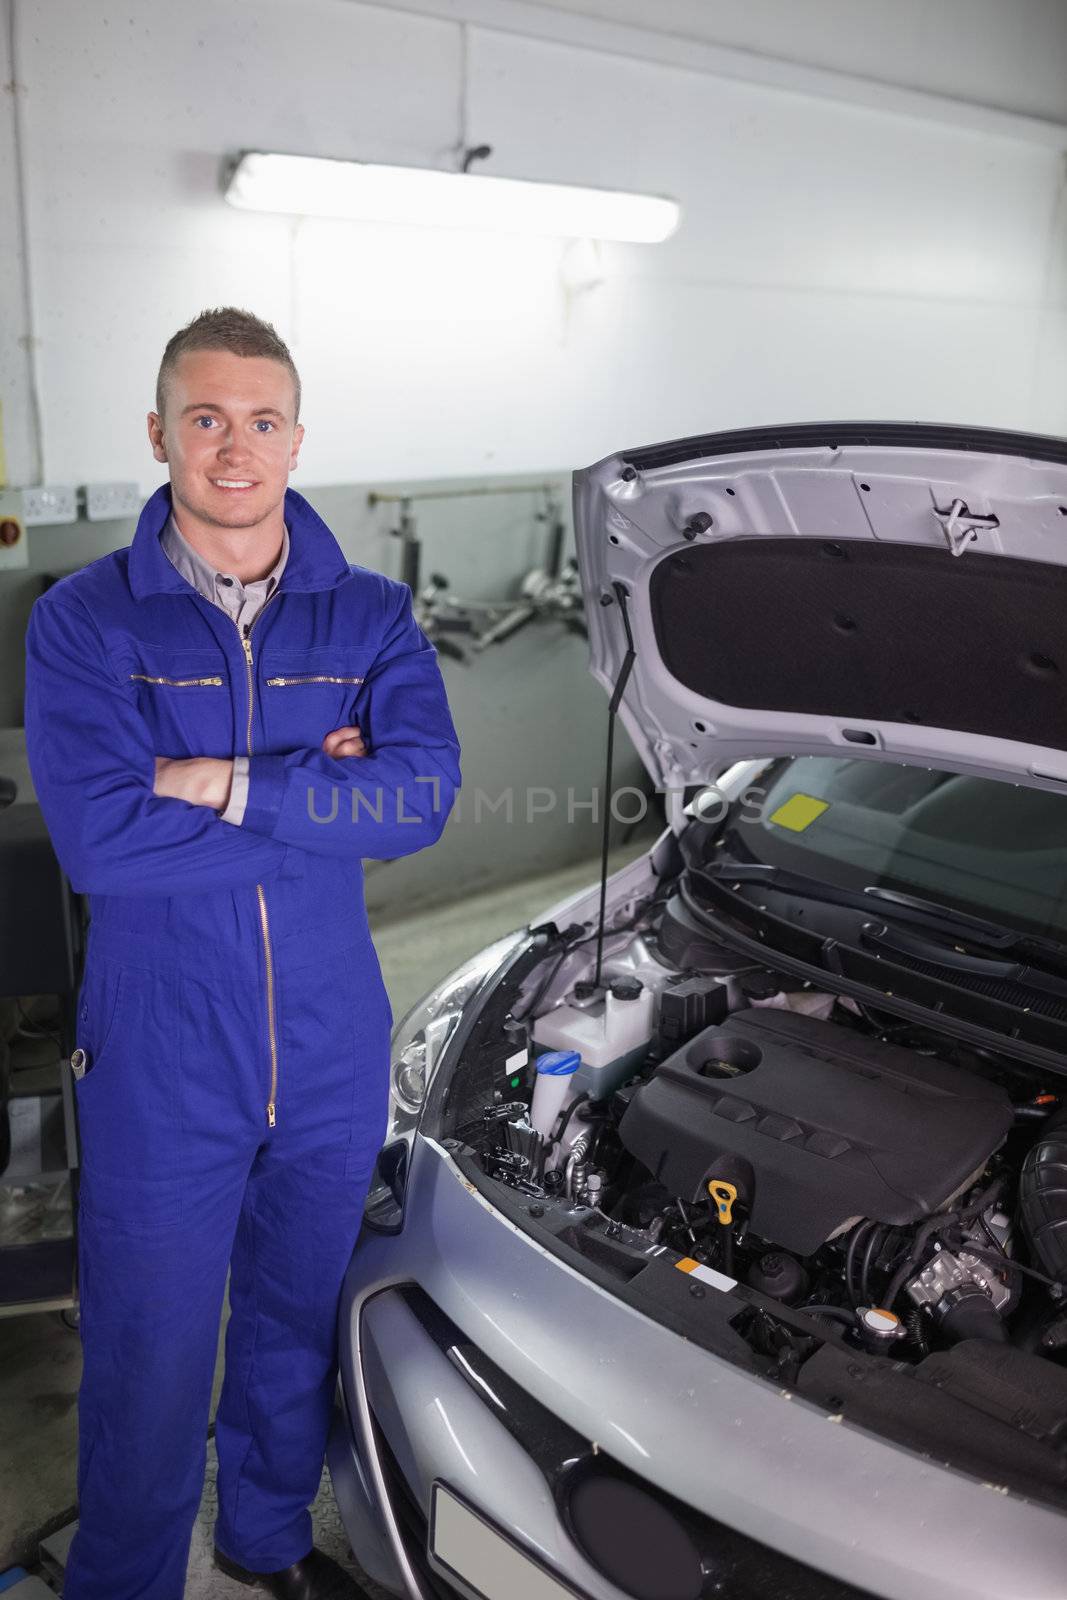 Smiling mechanic standing in a garage